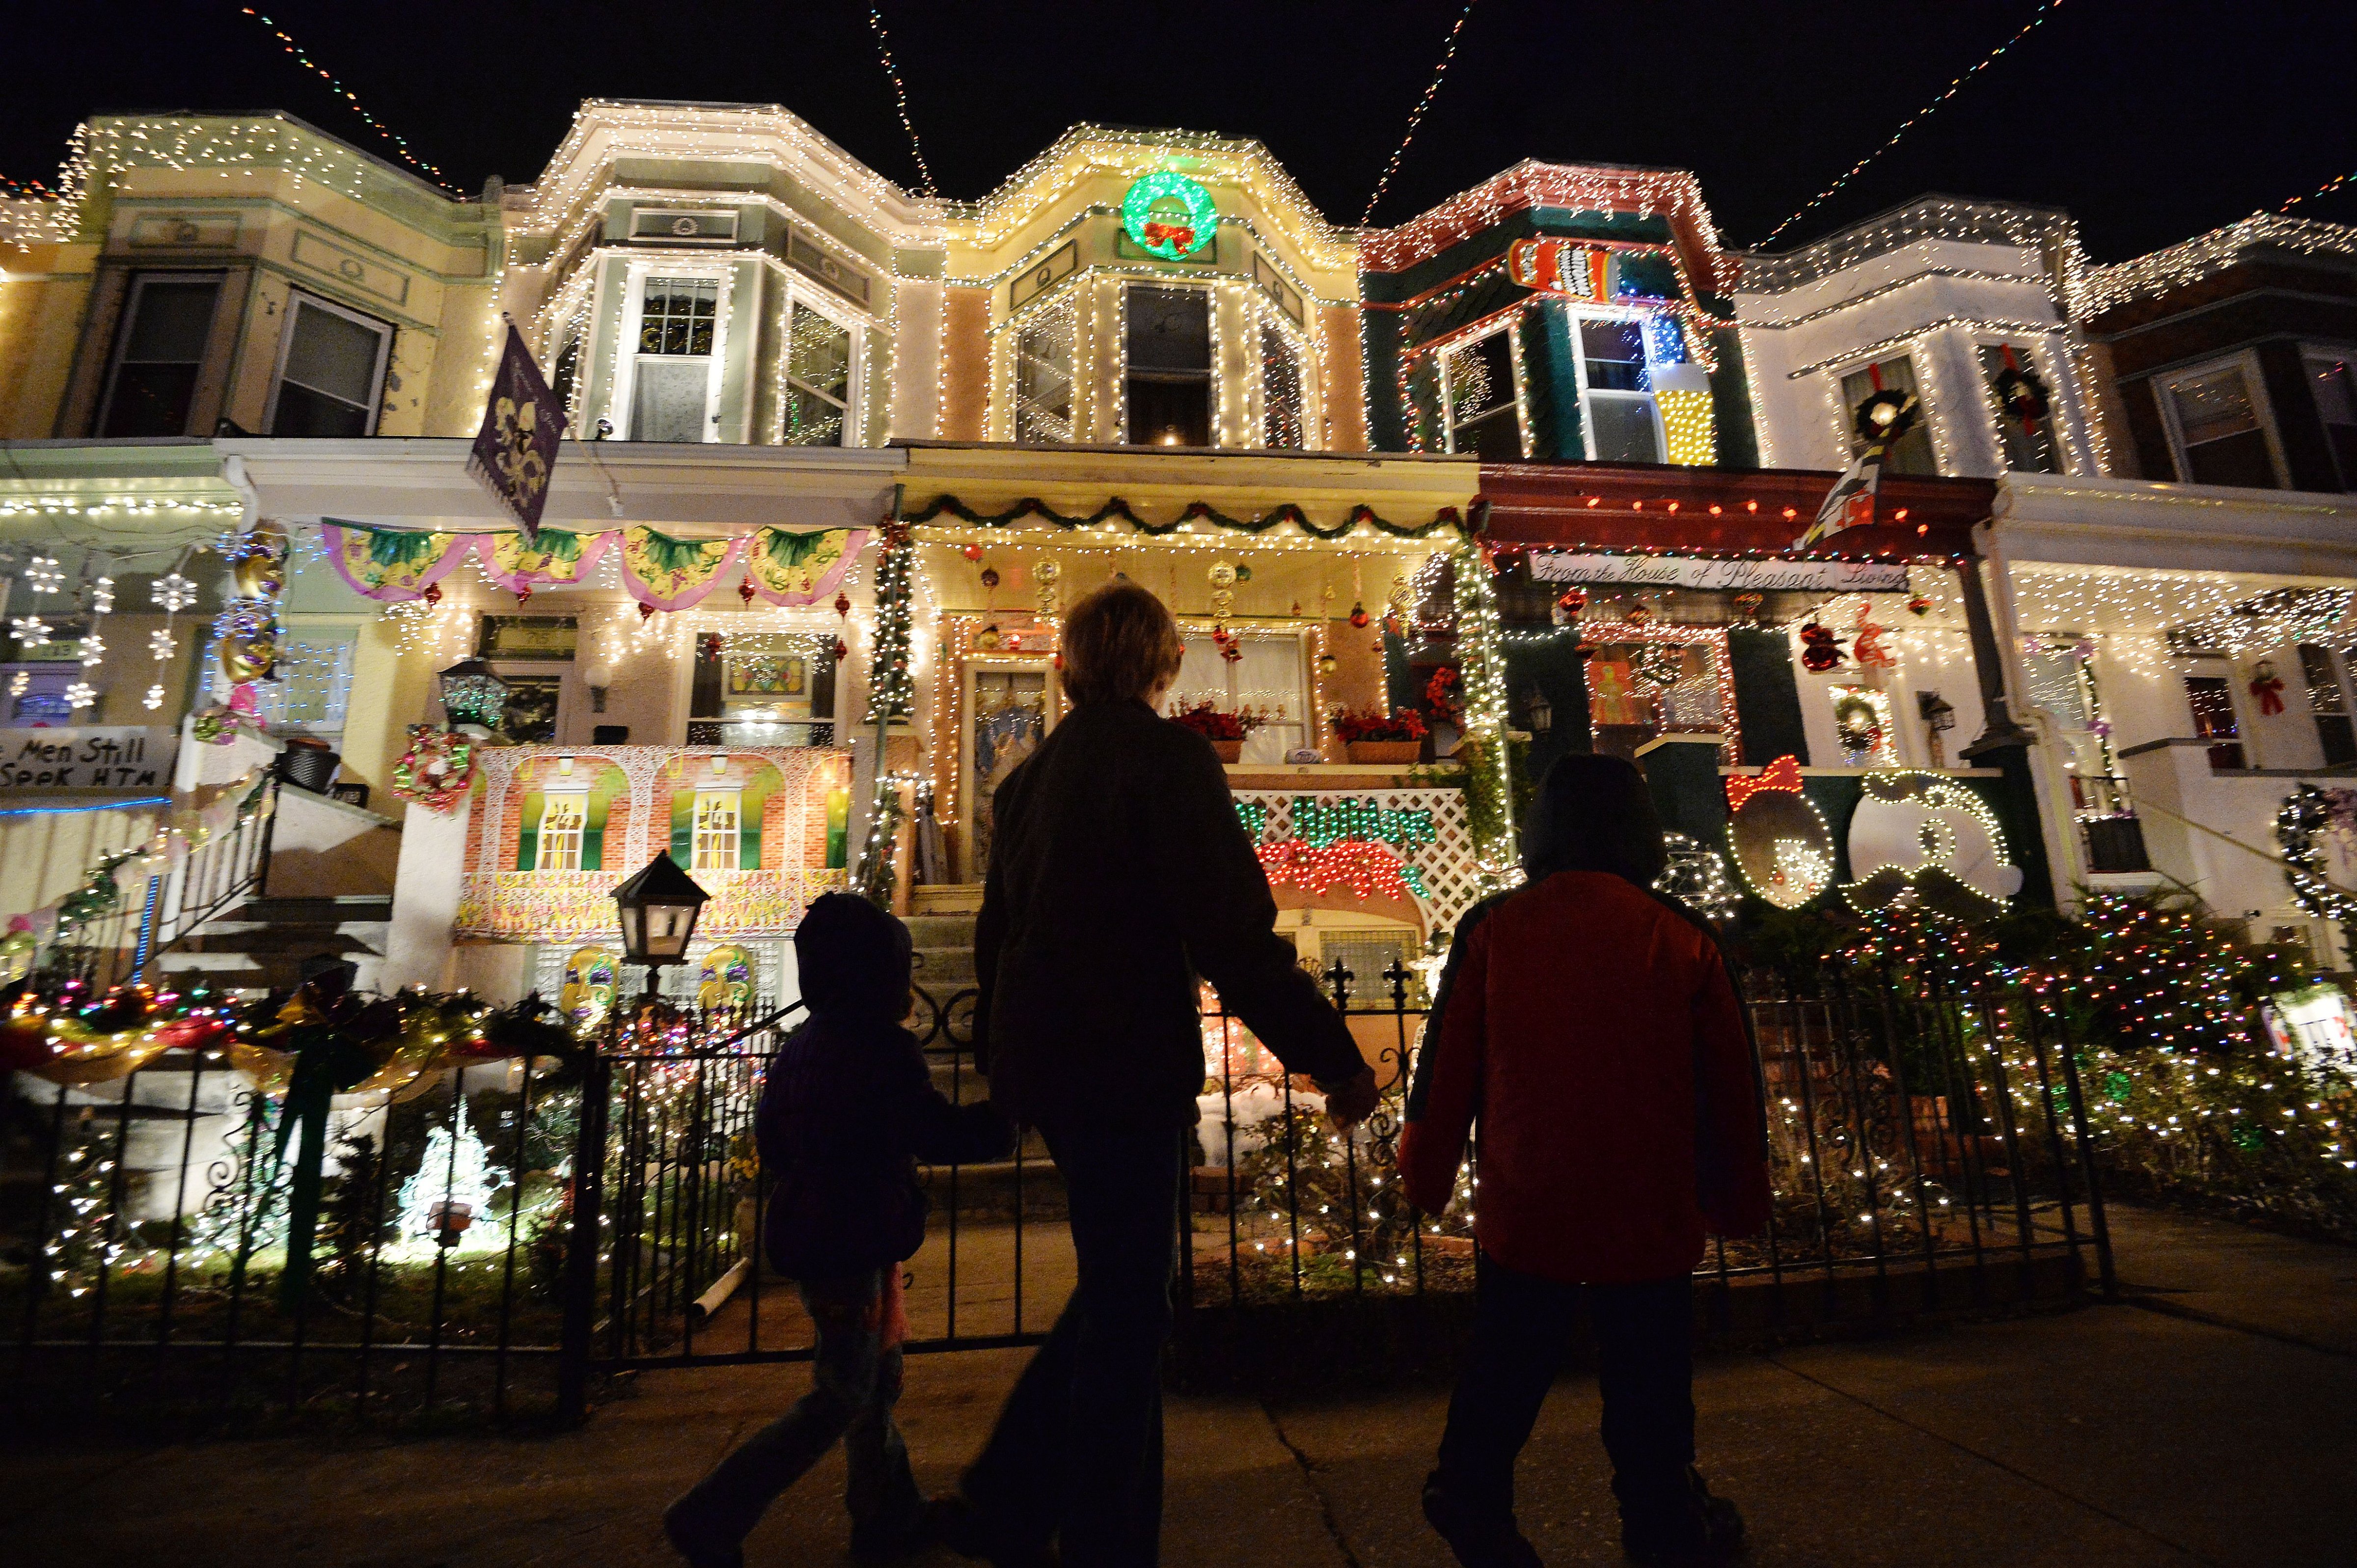 People enjoy the Christmas lights on the 700 block of 34th Street in the Hampden community of Baltimore, Maryland on December 12, 2014. (Mladen Antonov&mdash;AFP/Getty Images)